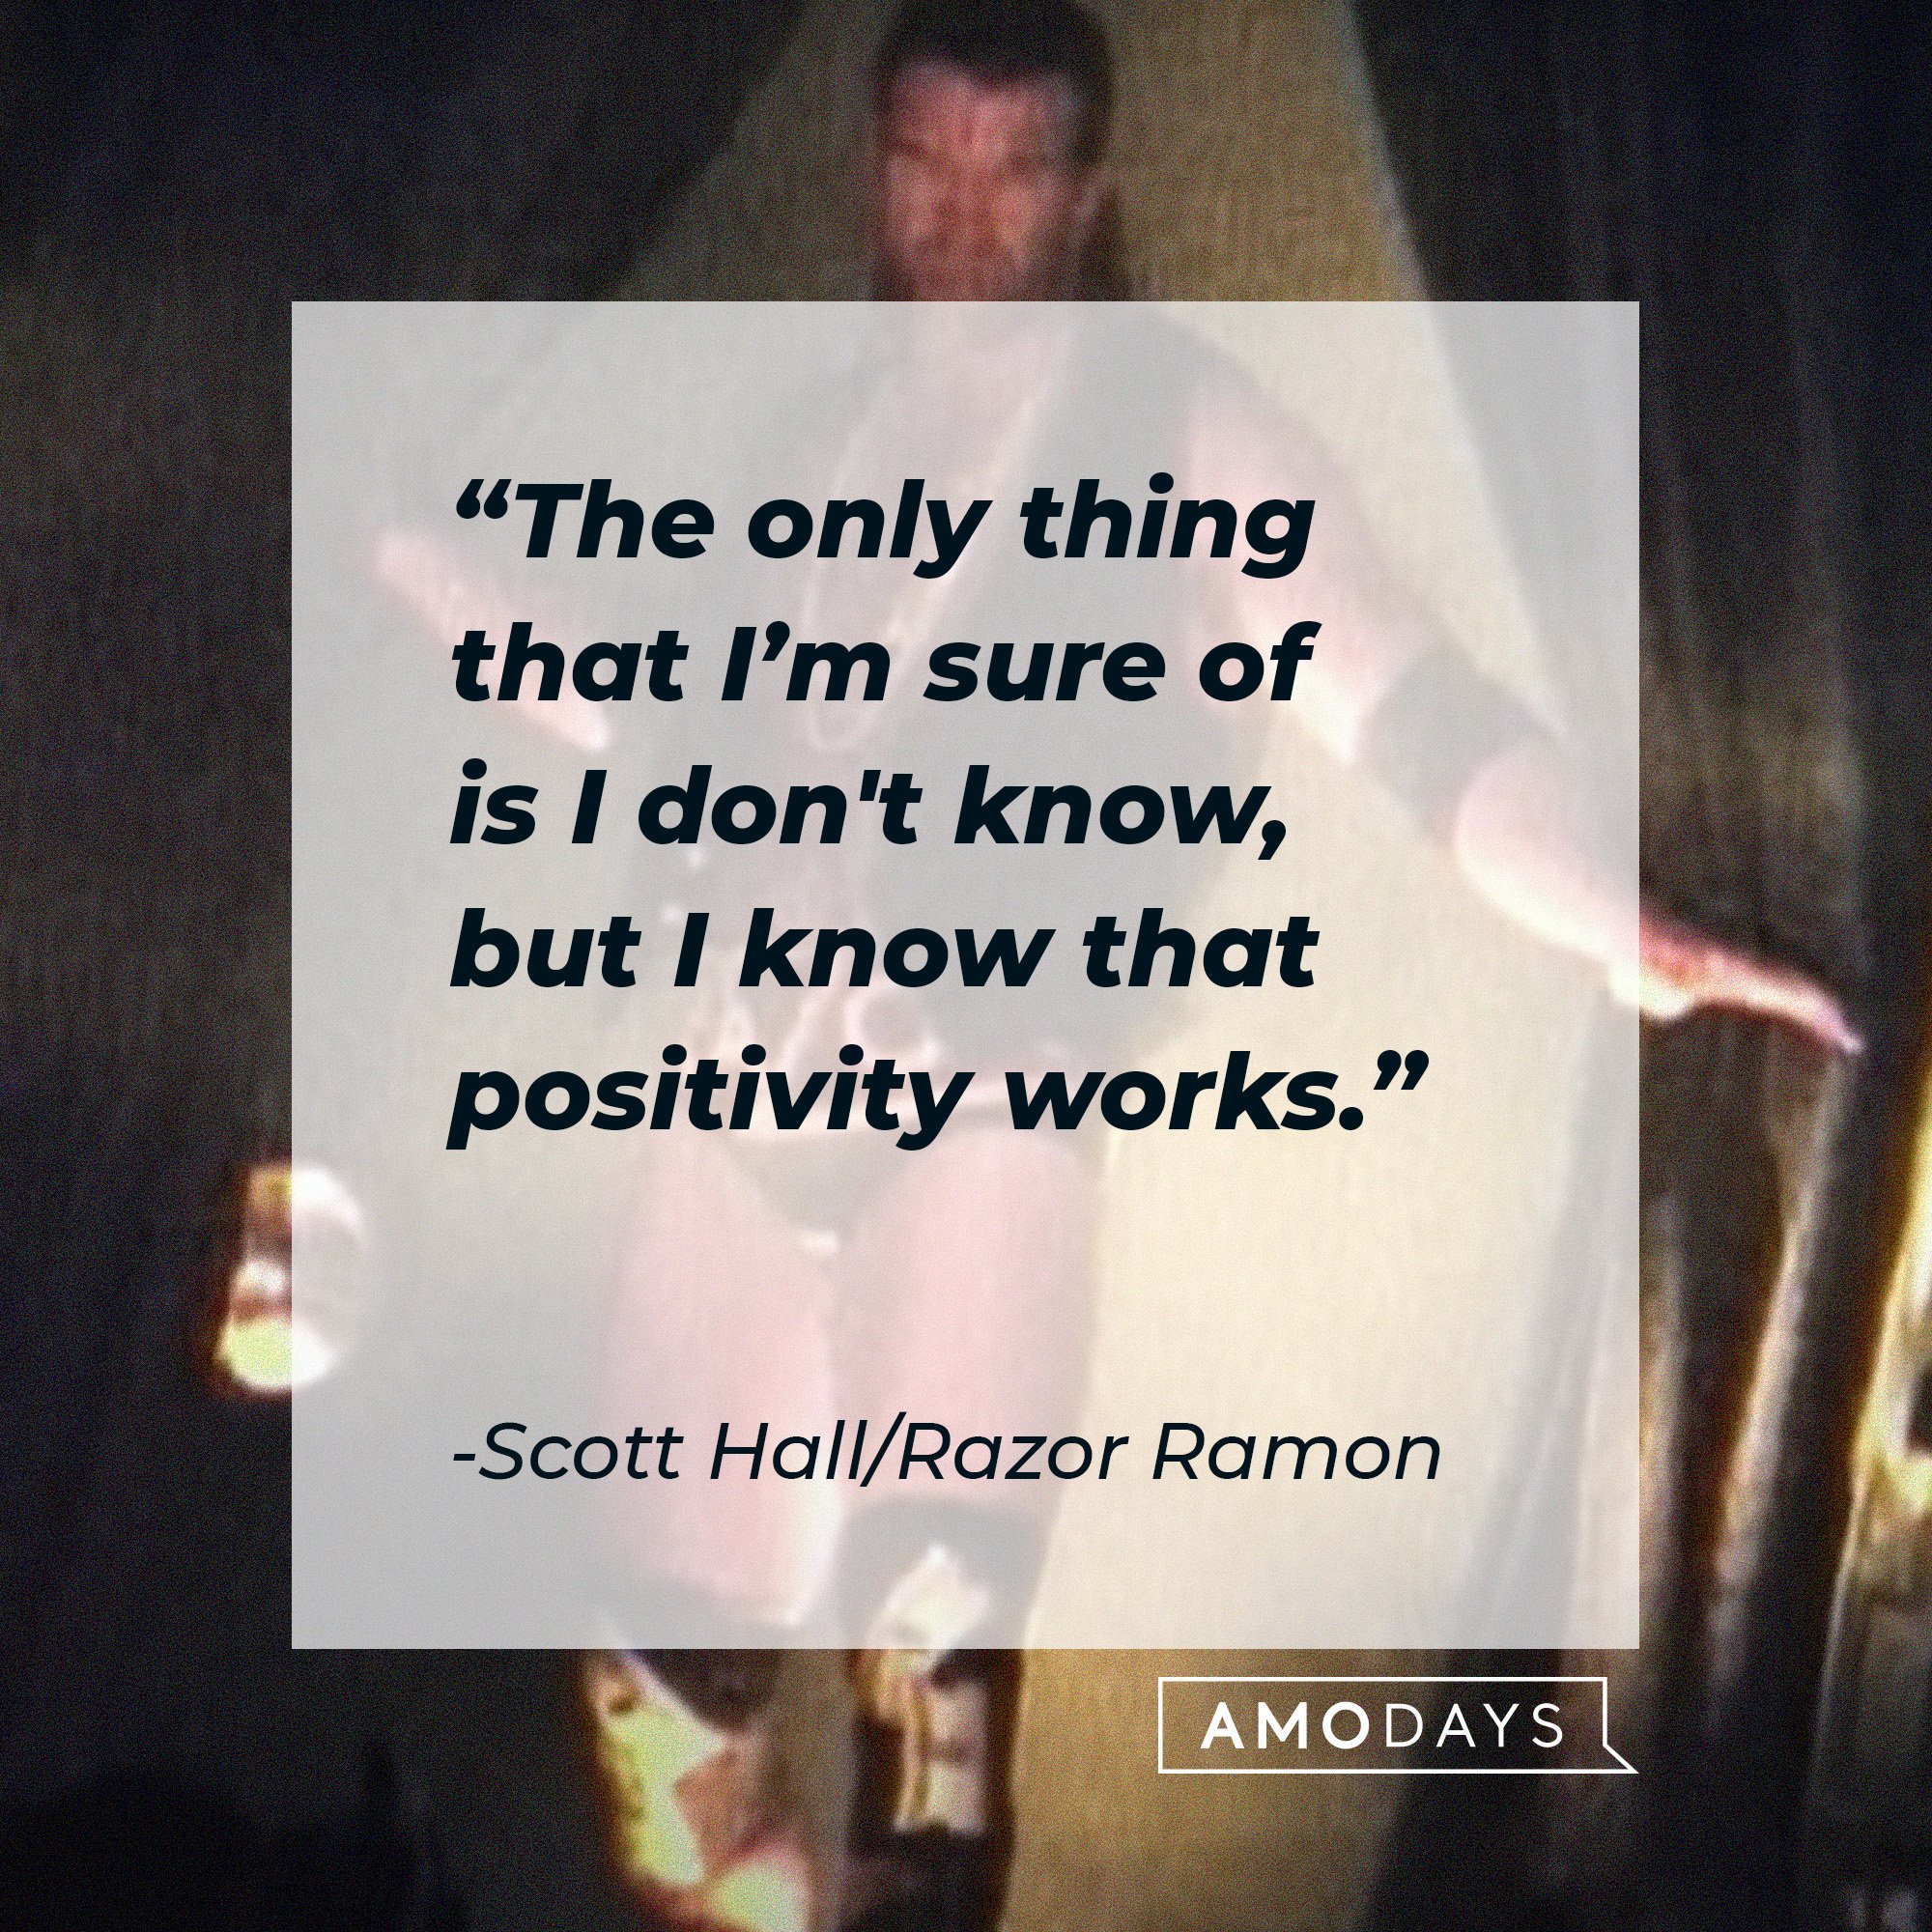 Scott Hall/Razor Ramon's quote: "The only thing that I'm sure of is I don't know, but I know that positivity works." | Image: AmoDays